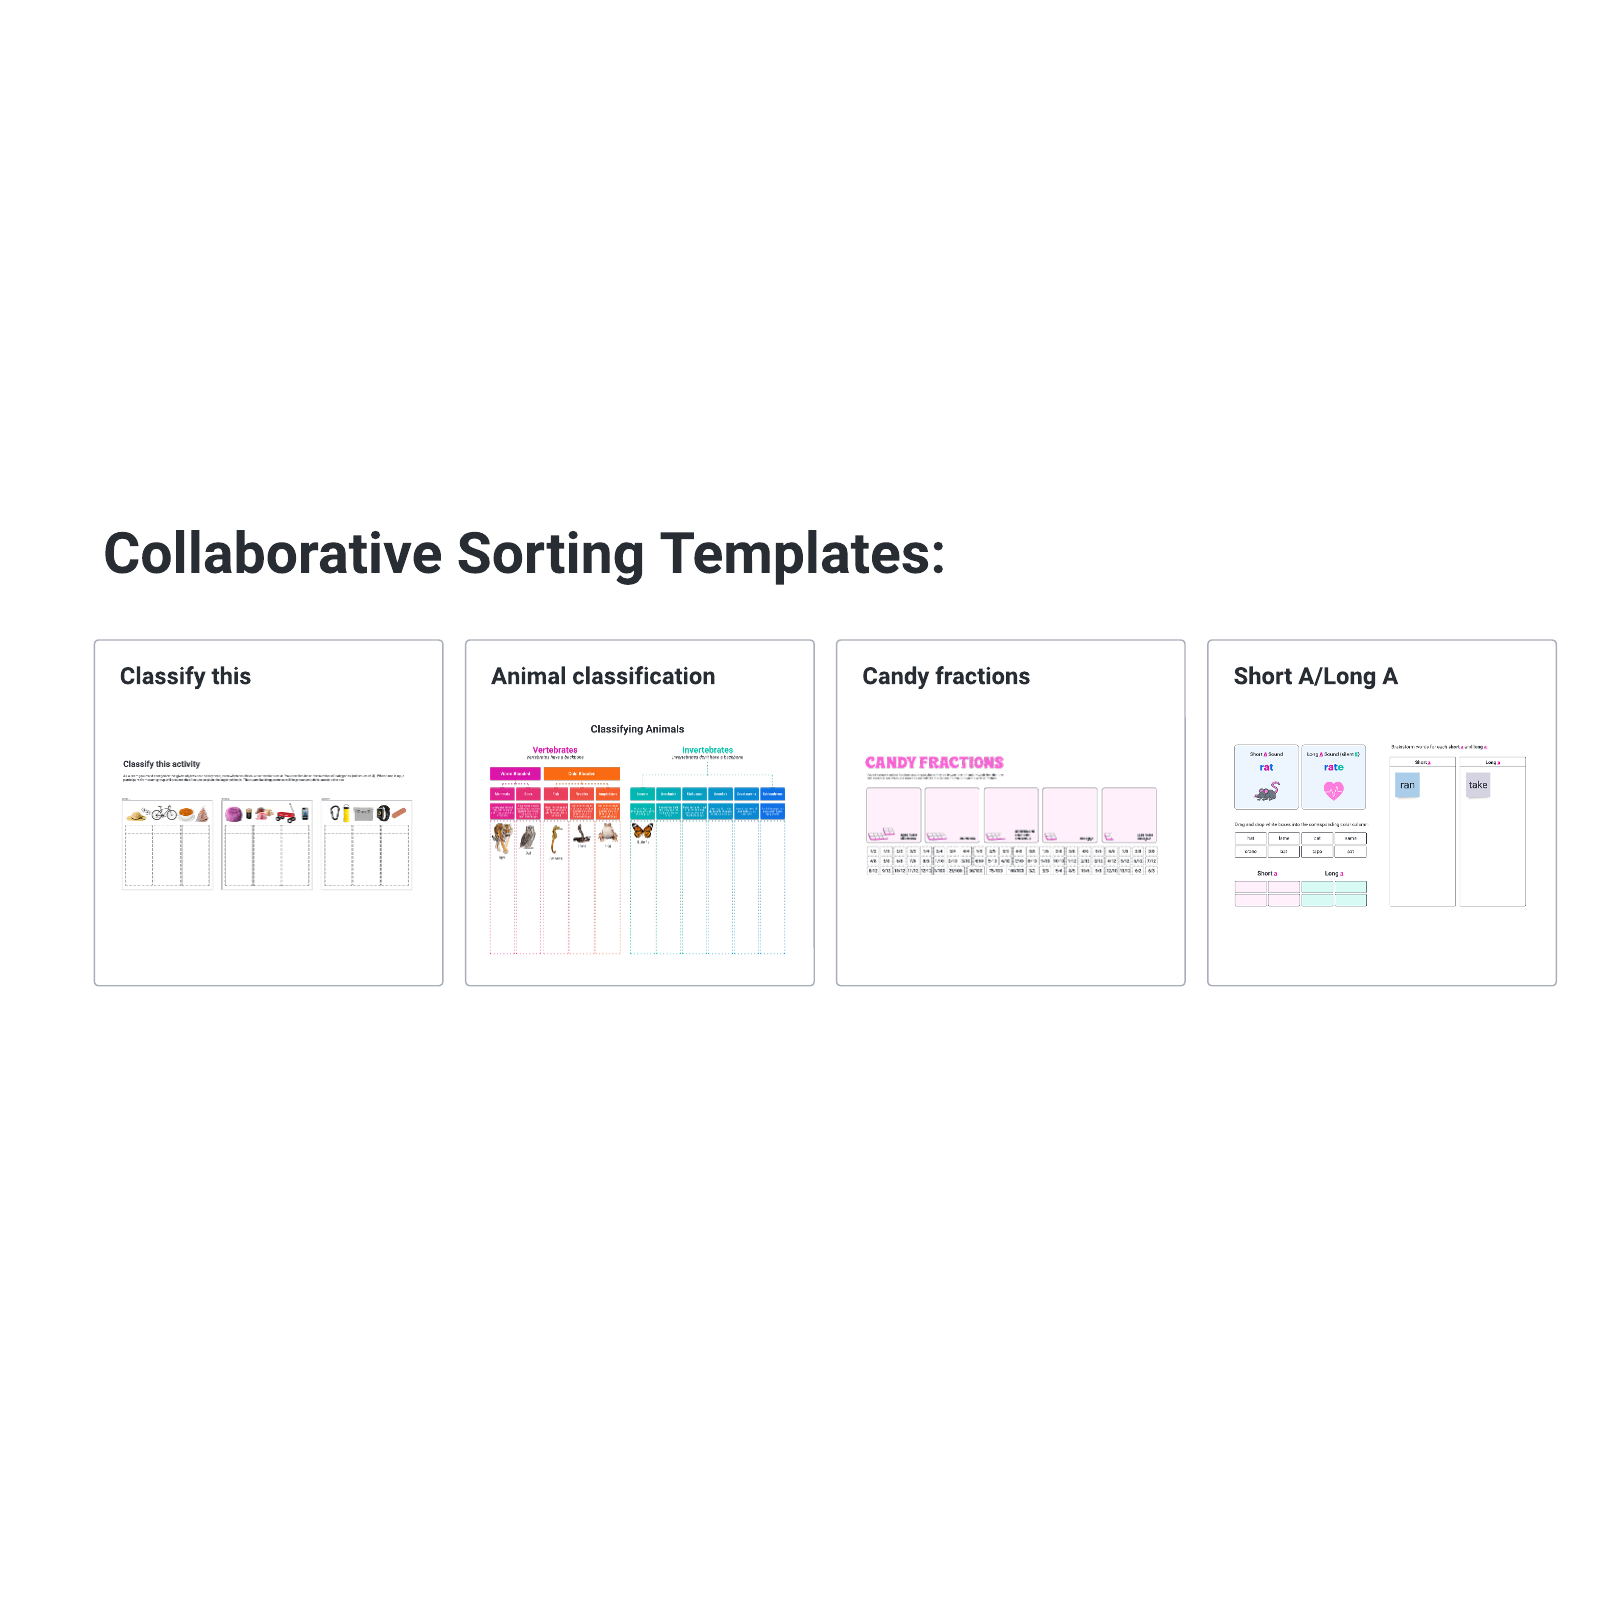 Collaborative sorting toolkit example